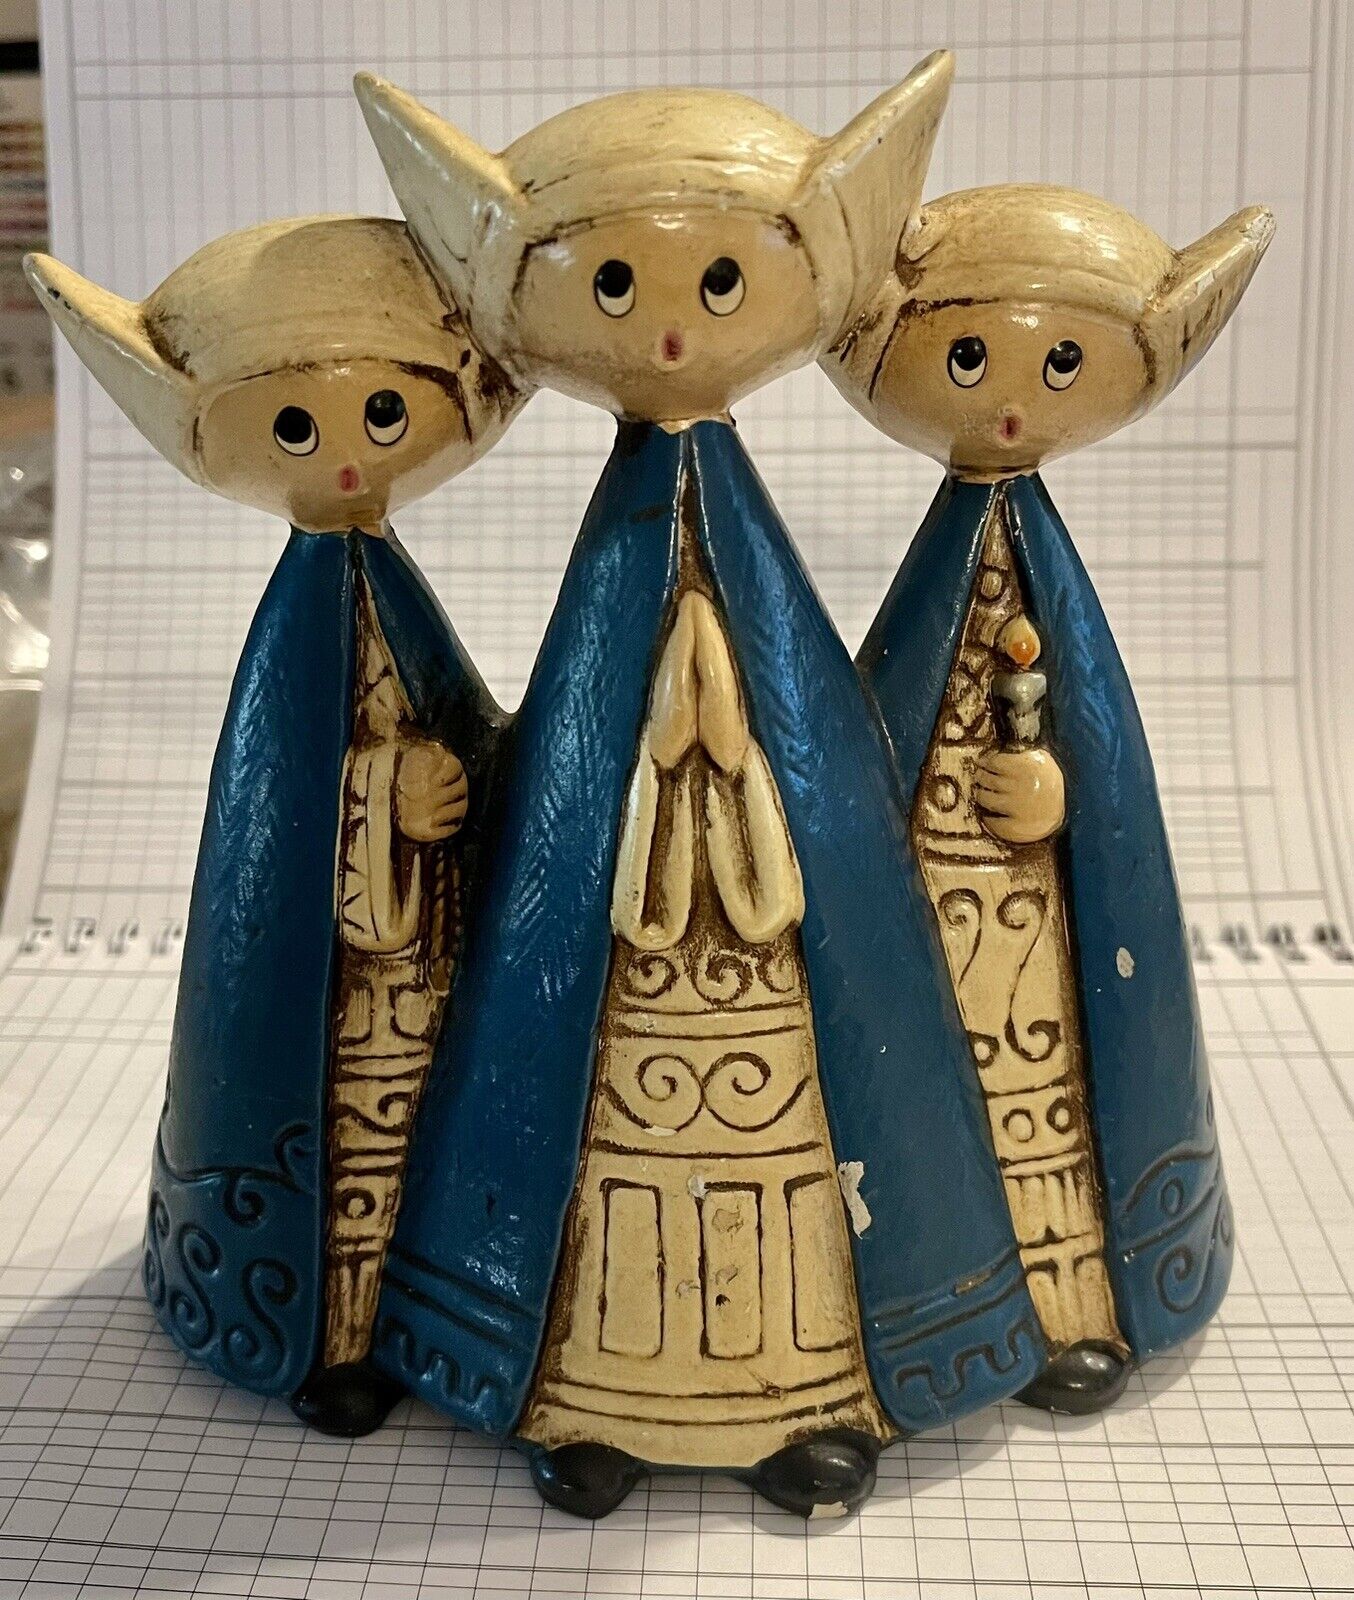 Vintage 60s or 70s Singing Christmas Carolers Nuns Trio Made in Japan Chalkware